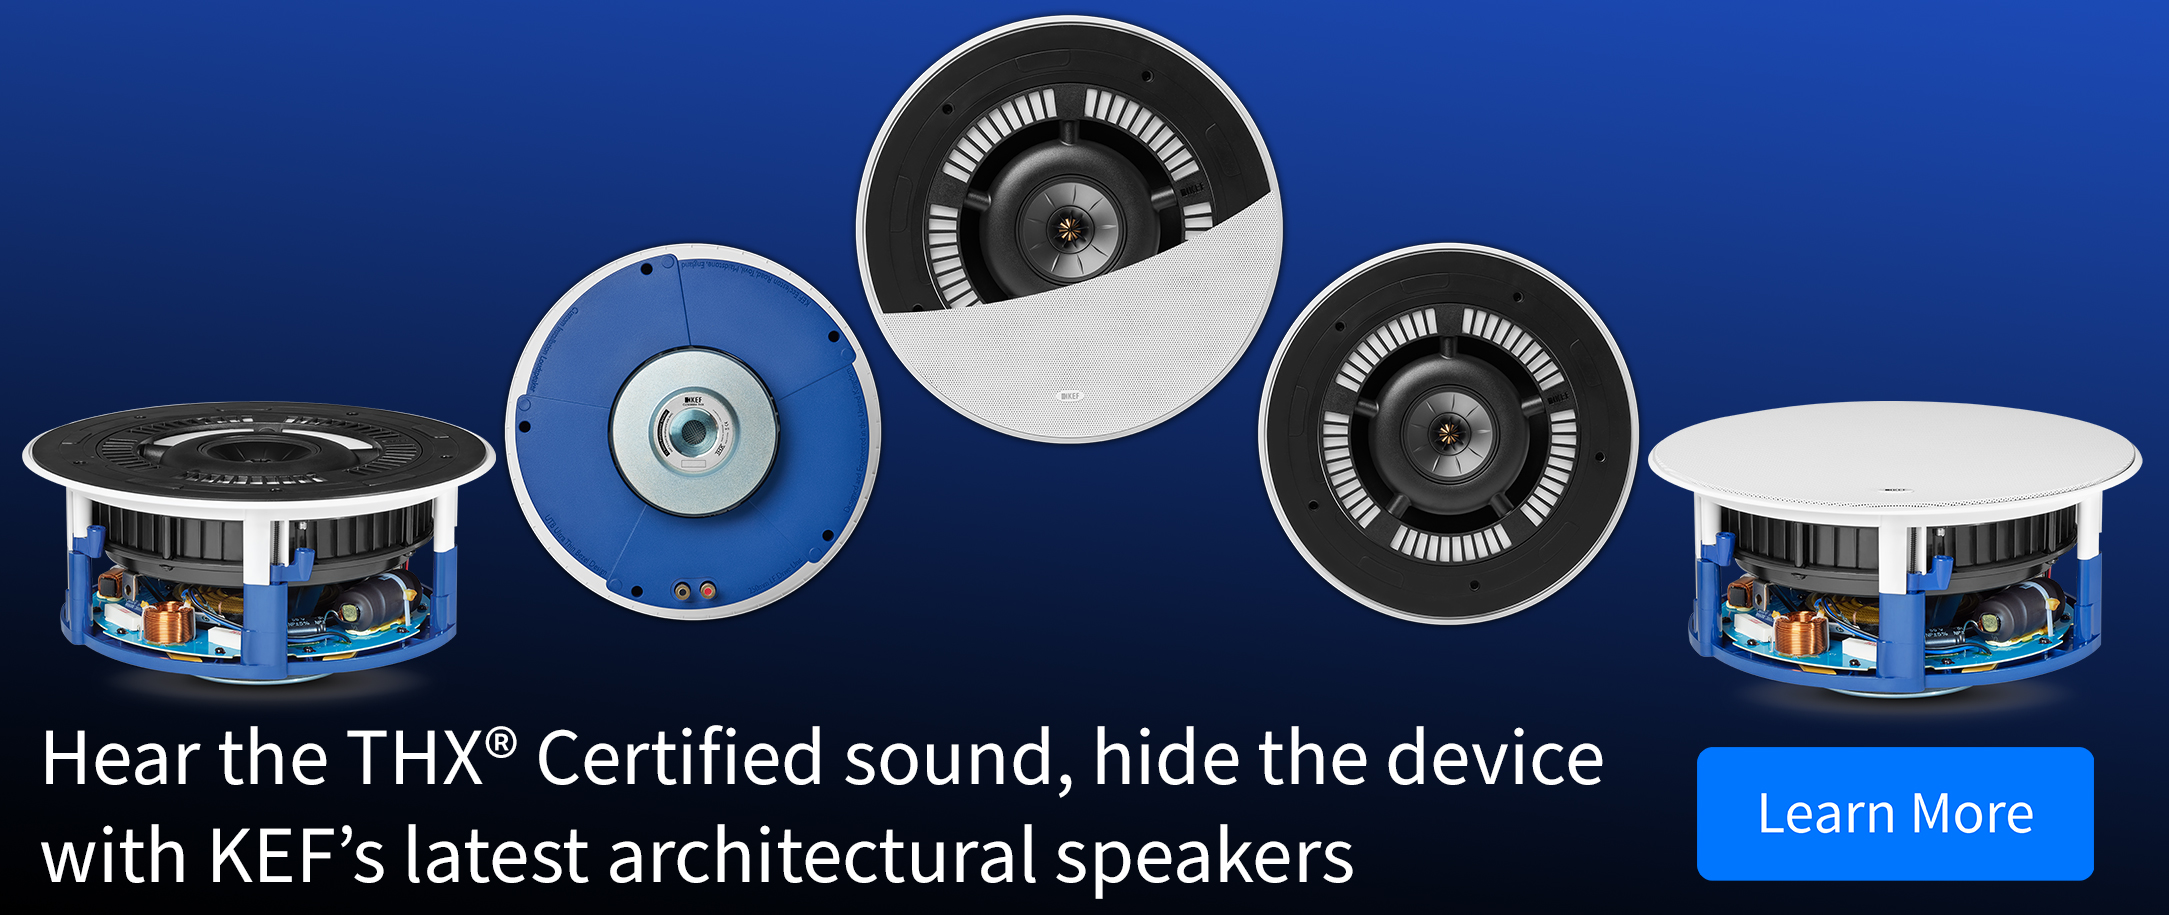 KEF architectural speakers on a blue and black background